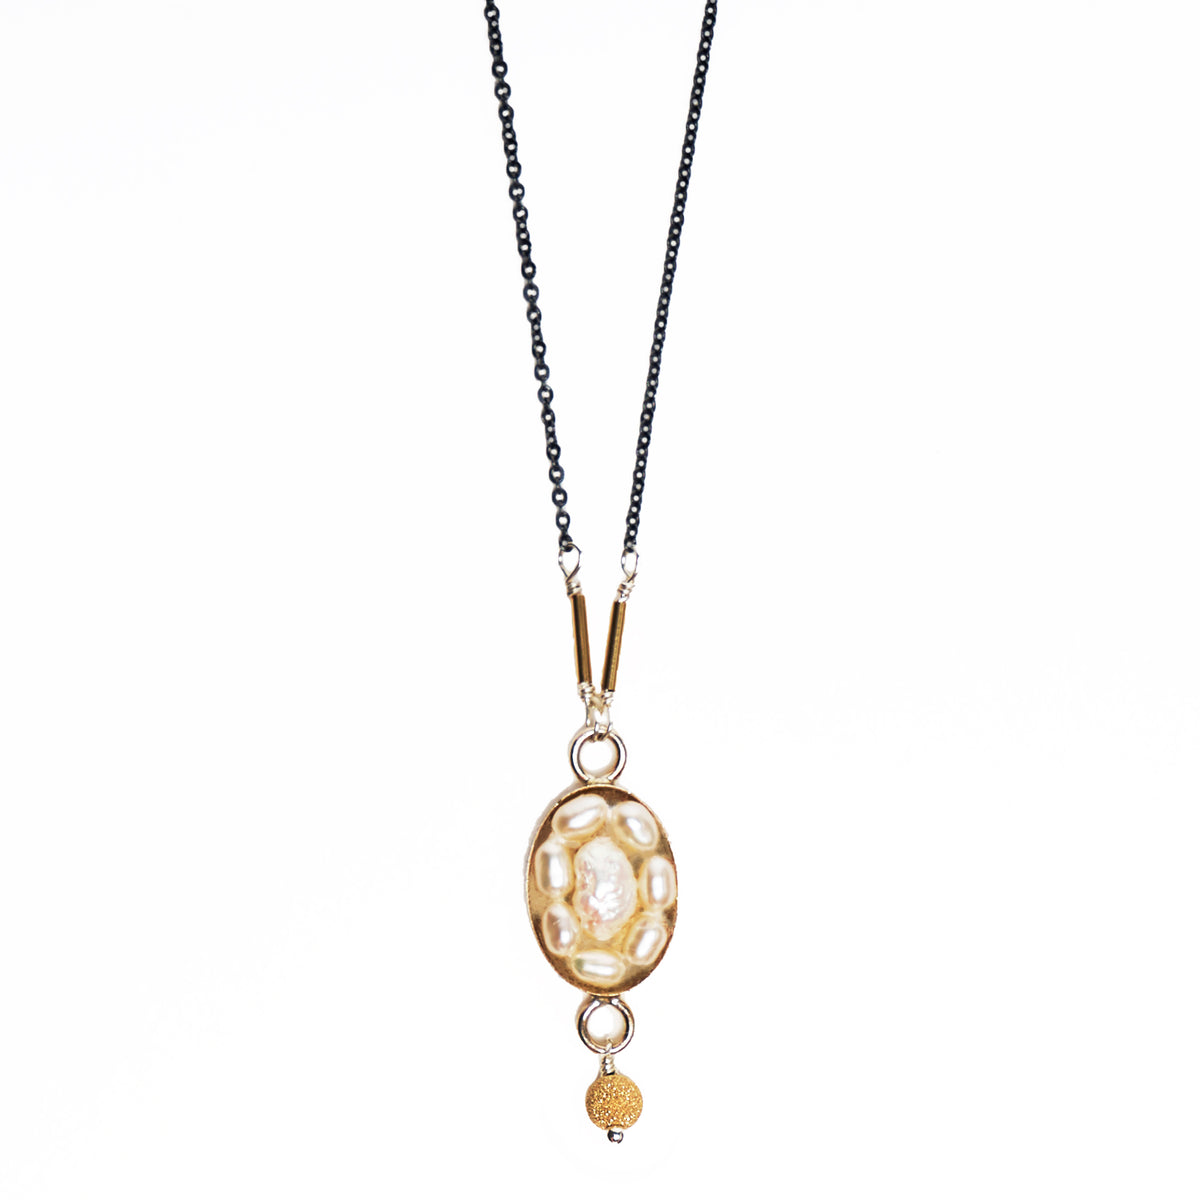 Oval Pearl Mosaic Necklace with Gold Accents